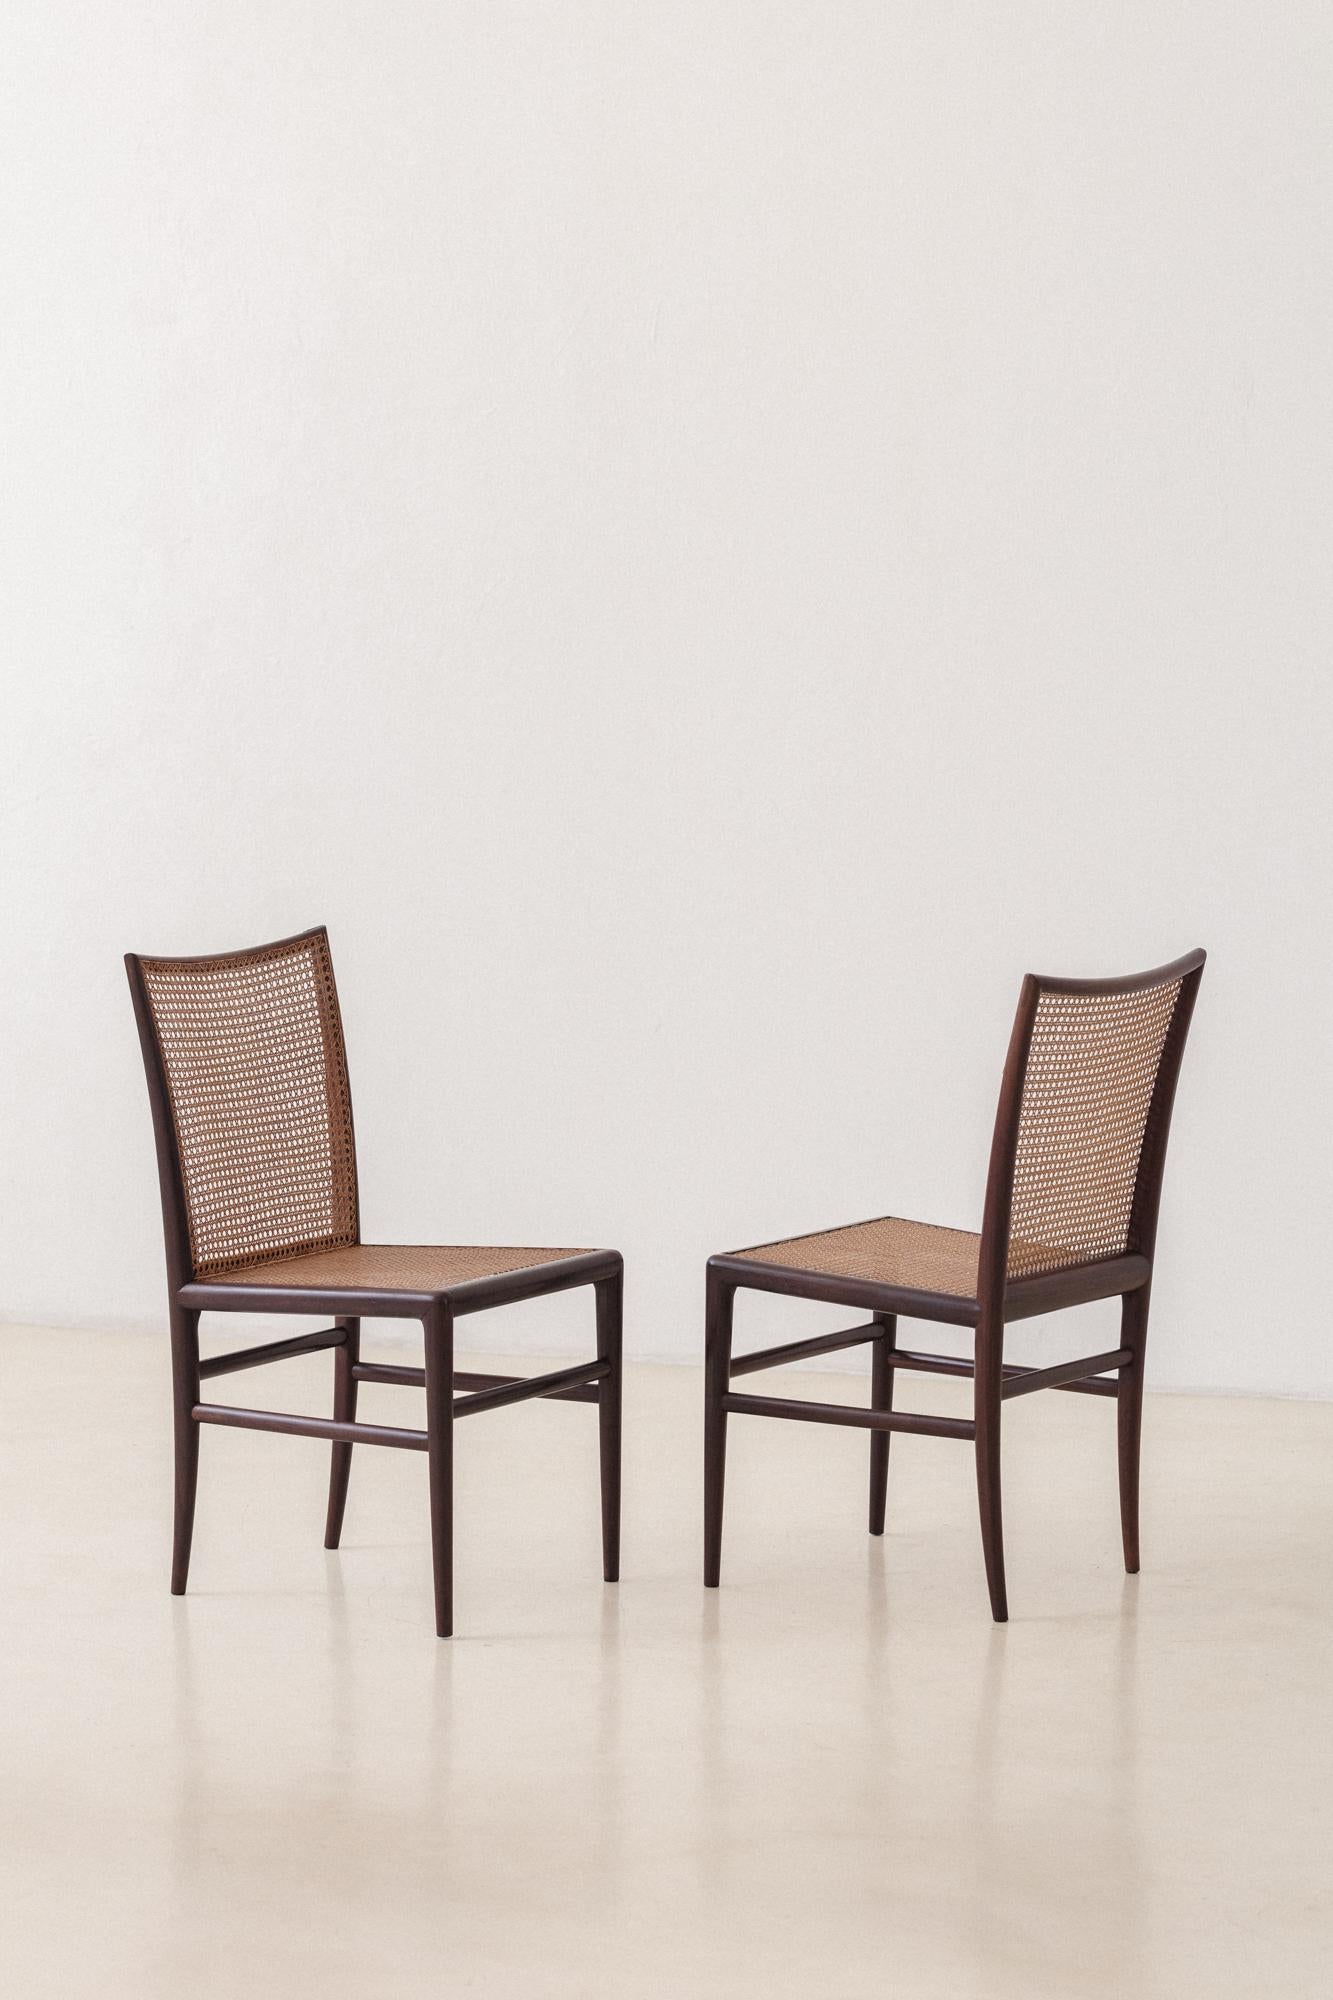 Hand-Woven Set of 8 Rosewood Cane Chairs, Branco & Preto, 1952, Brazilian Midcentury For Sale